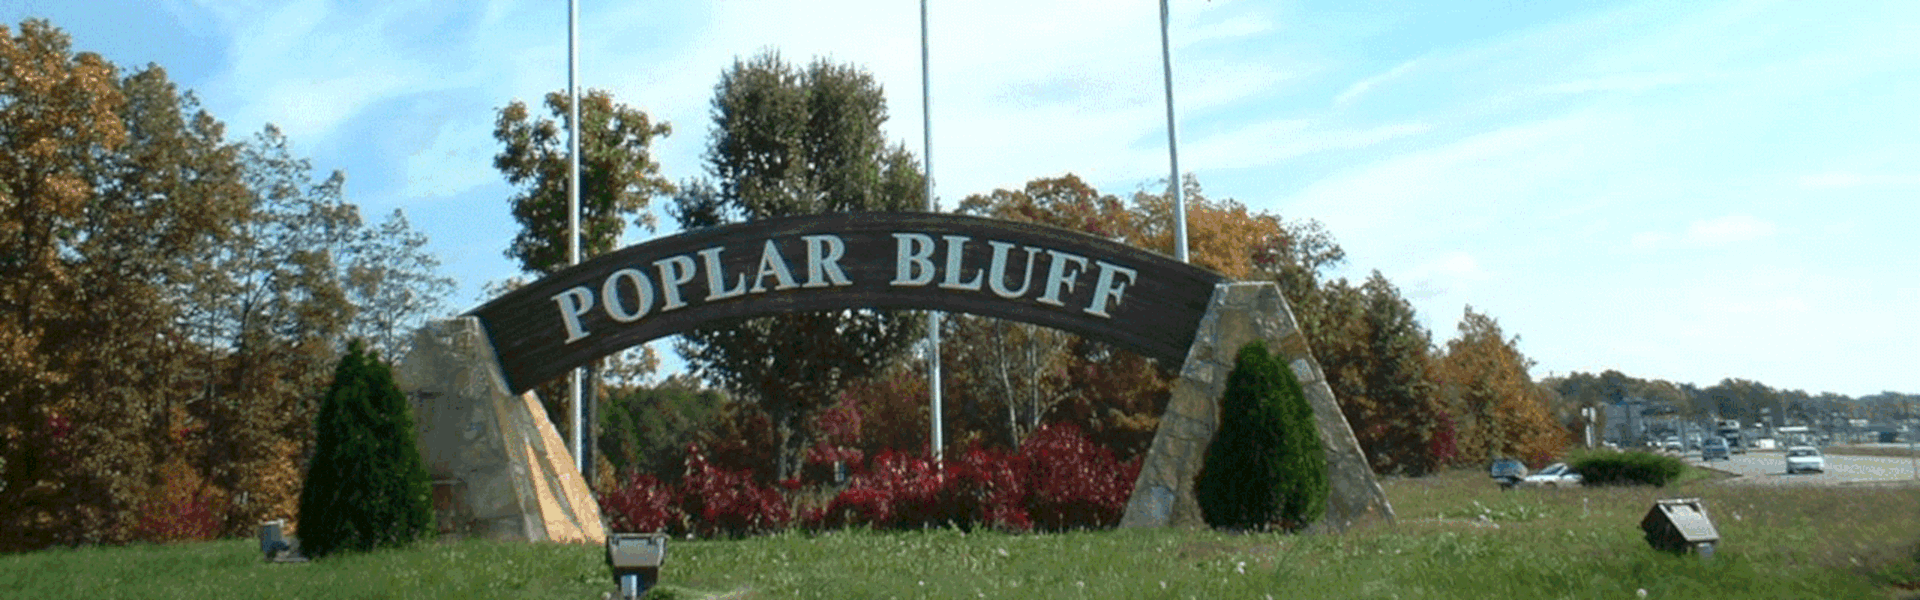 Home Poplar Bluff, MO, Local History LibGuides at University of